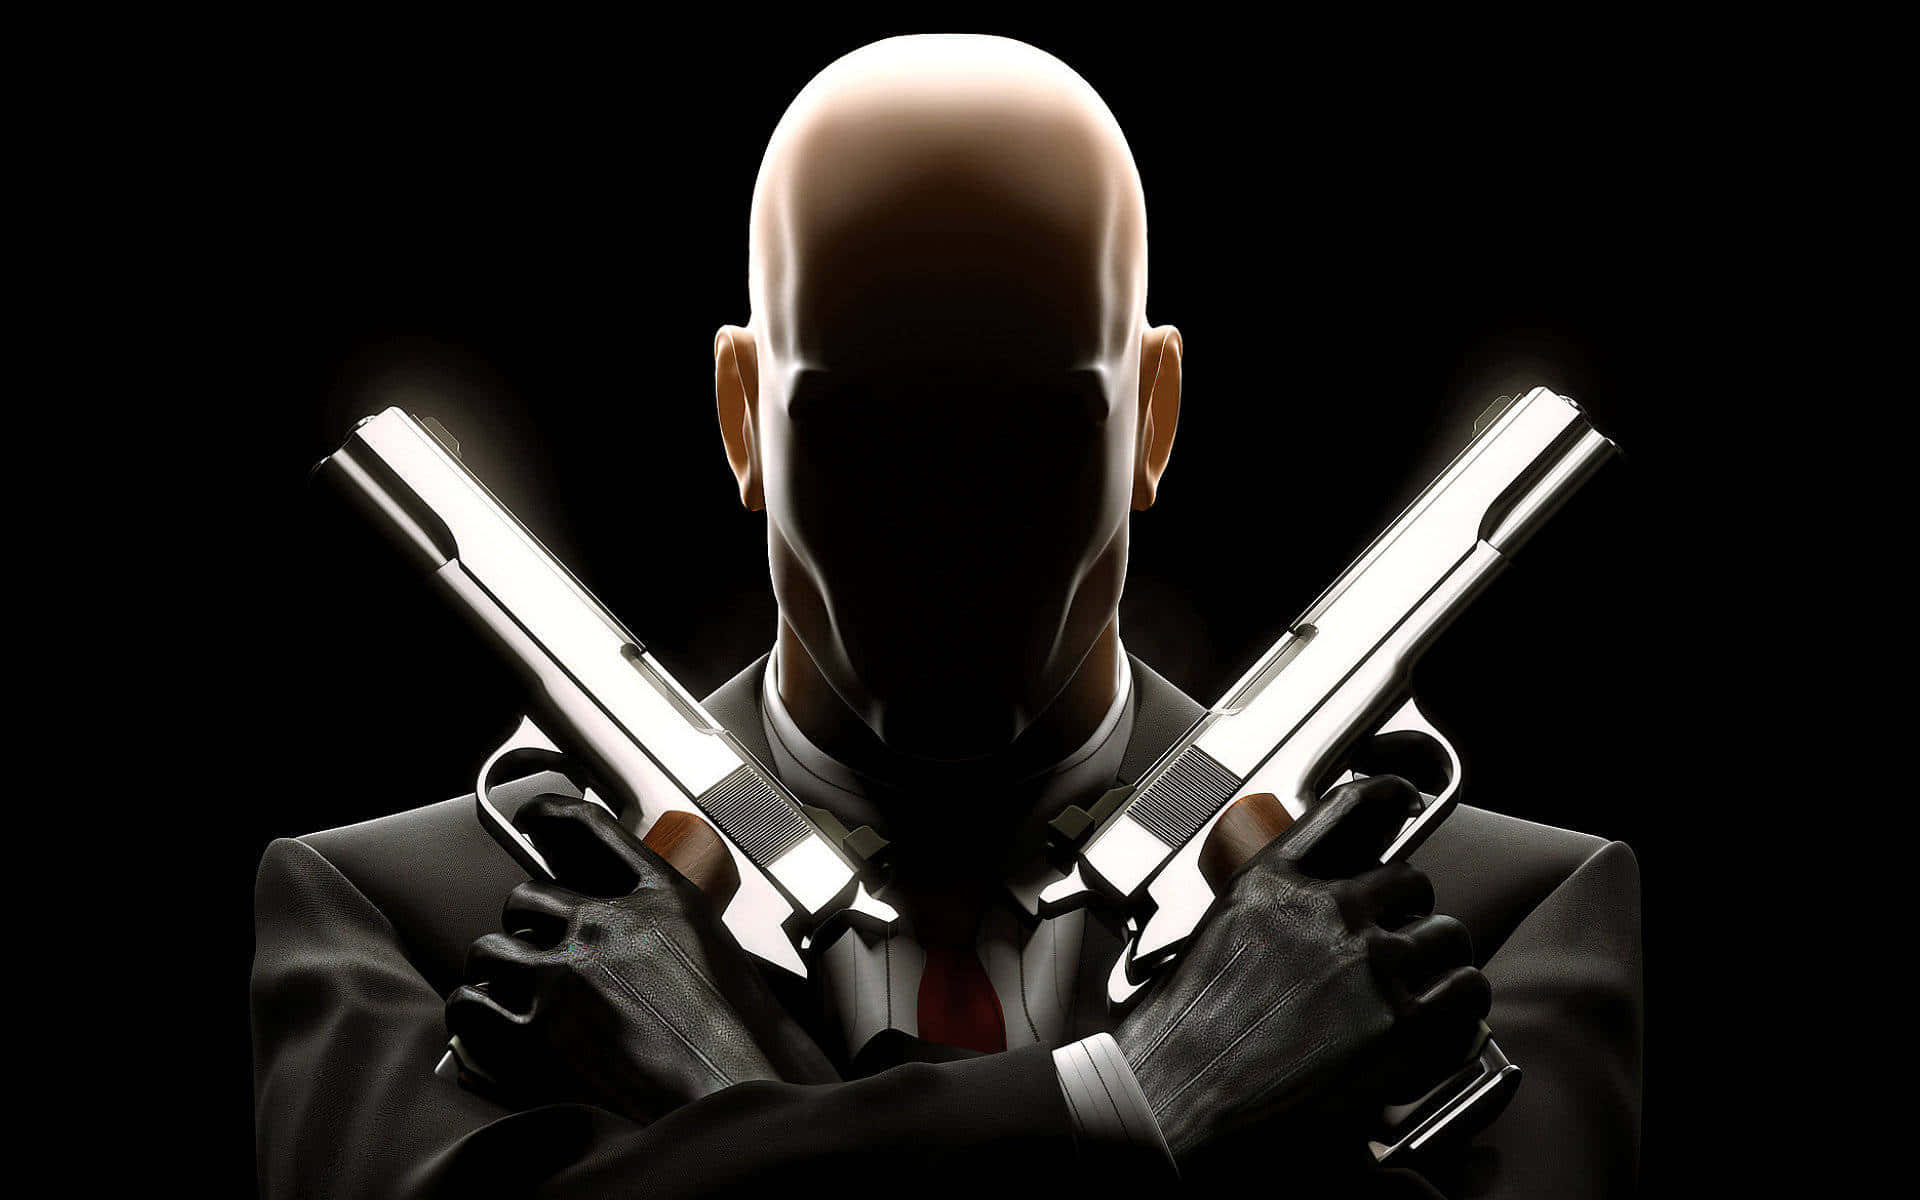 Immerse yourself in the world of a Hitman Wallpaper